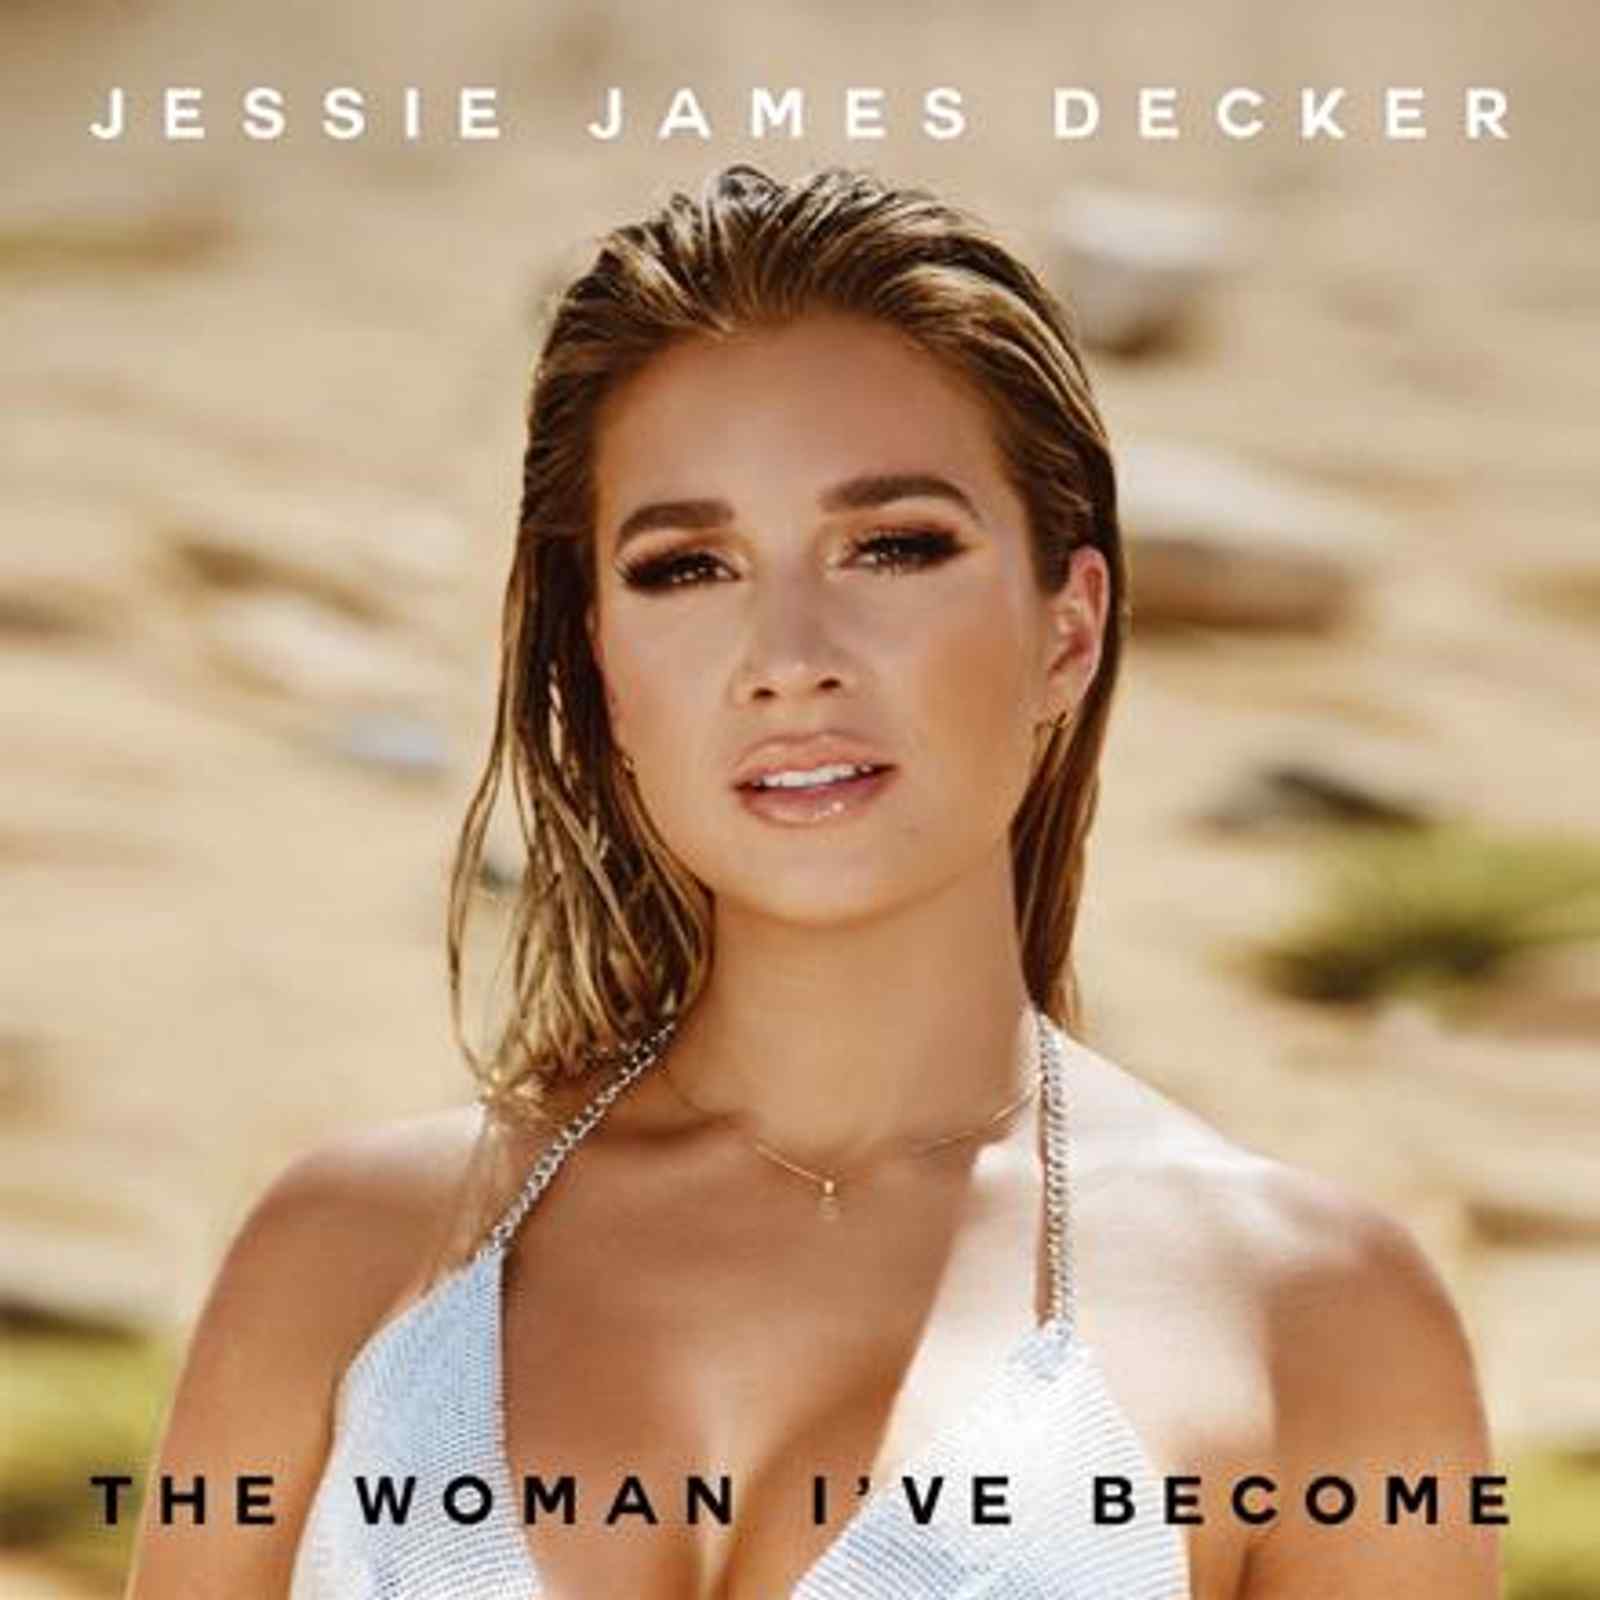 The Woman I've Become EP by Jessie James Decker